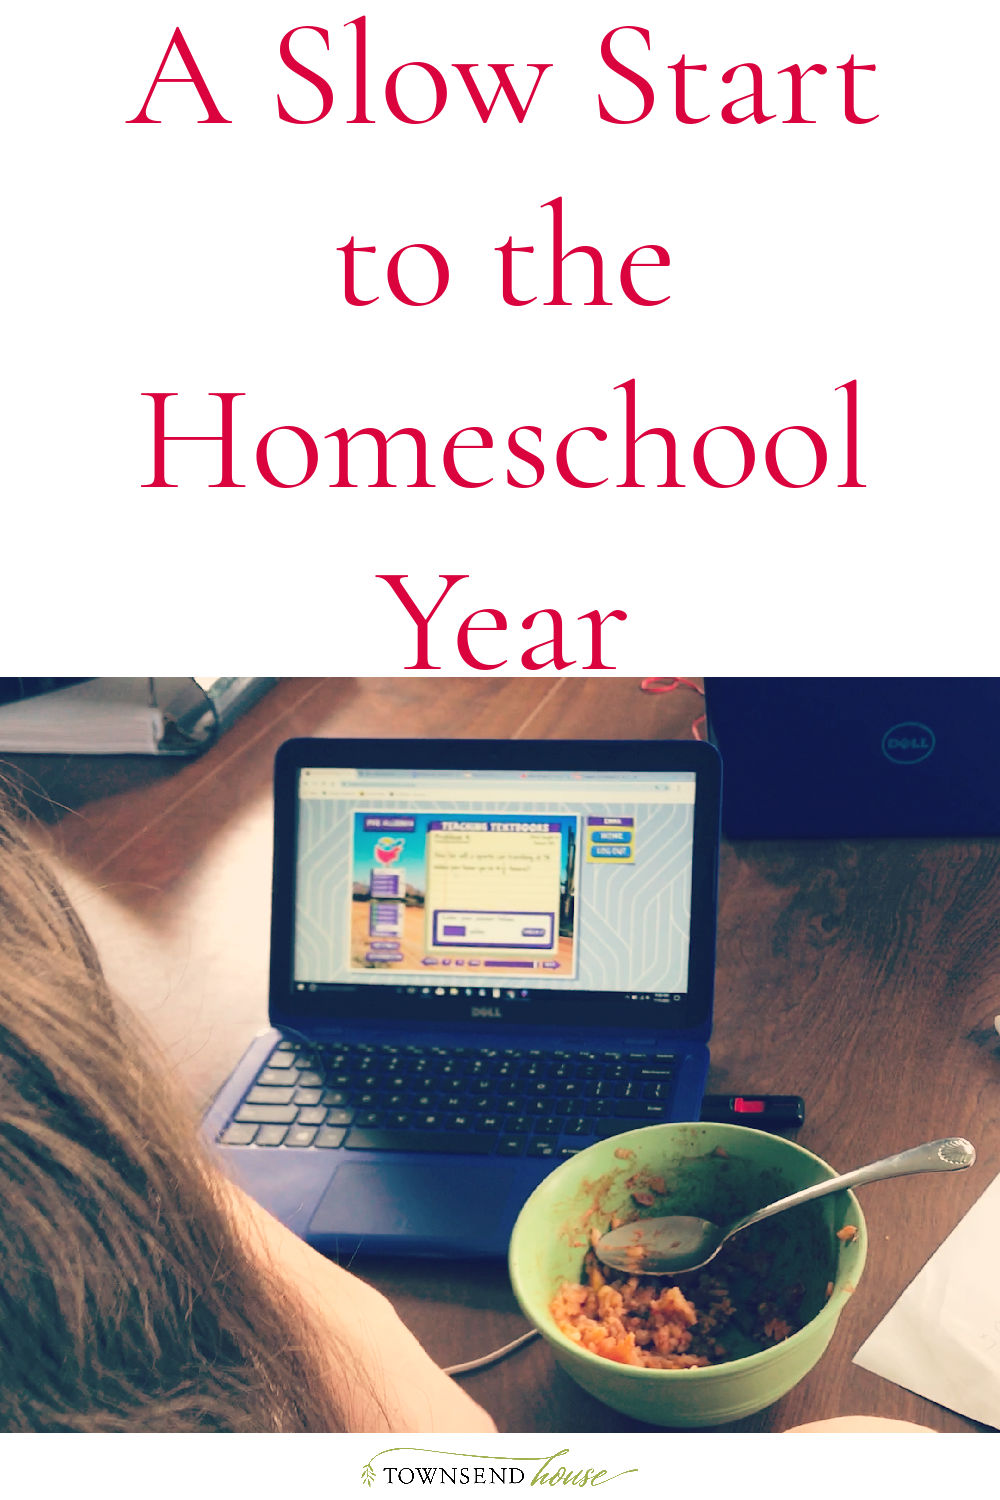 A Slow Start to the Homeschool Year – 2020-2021